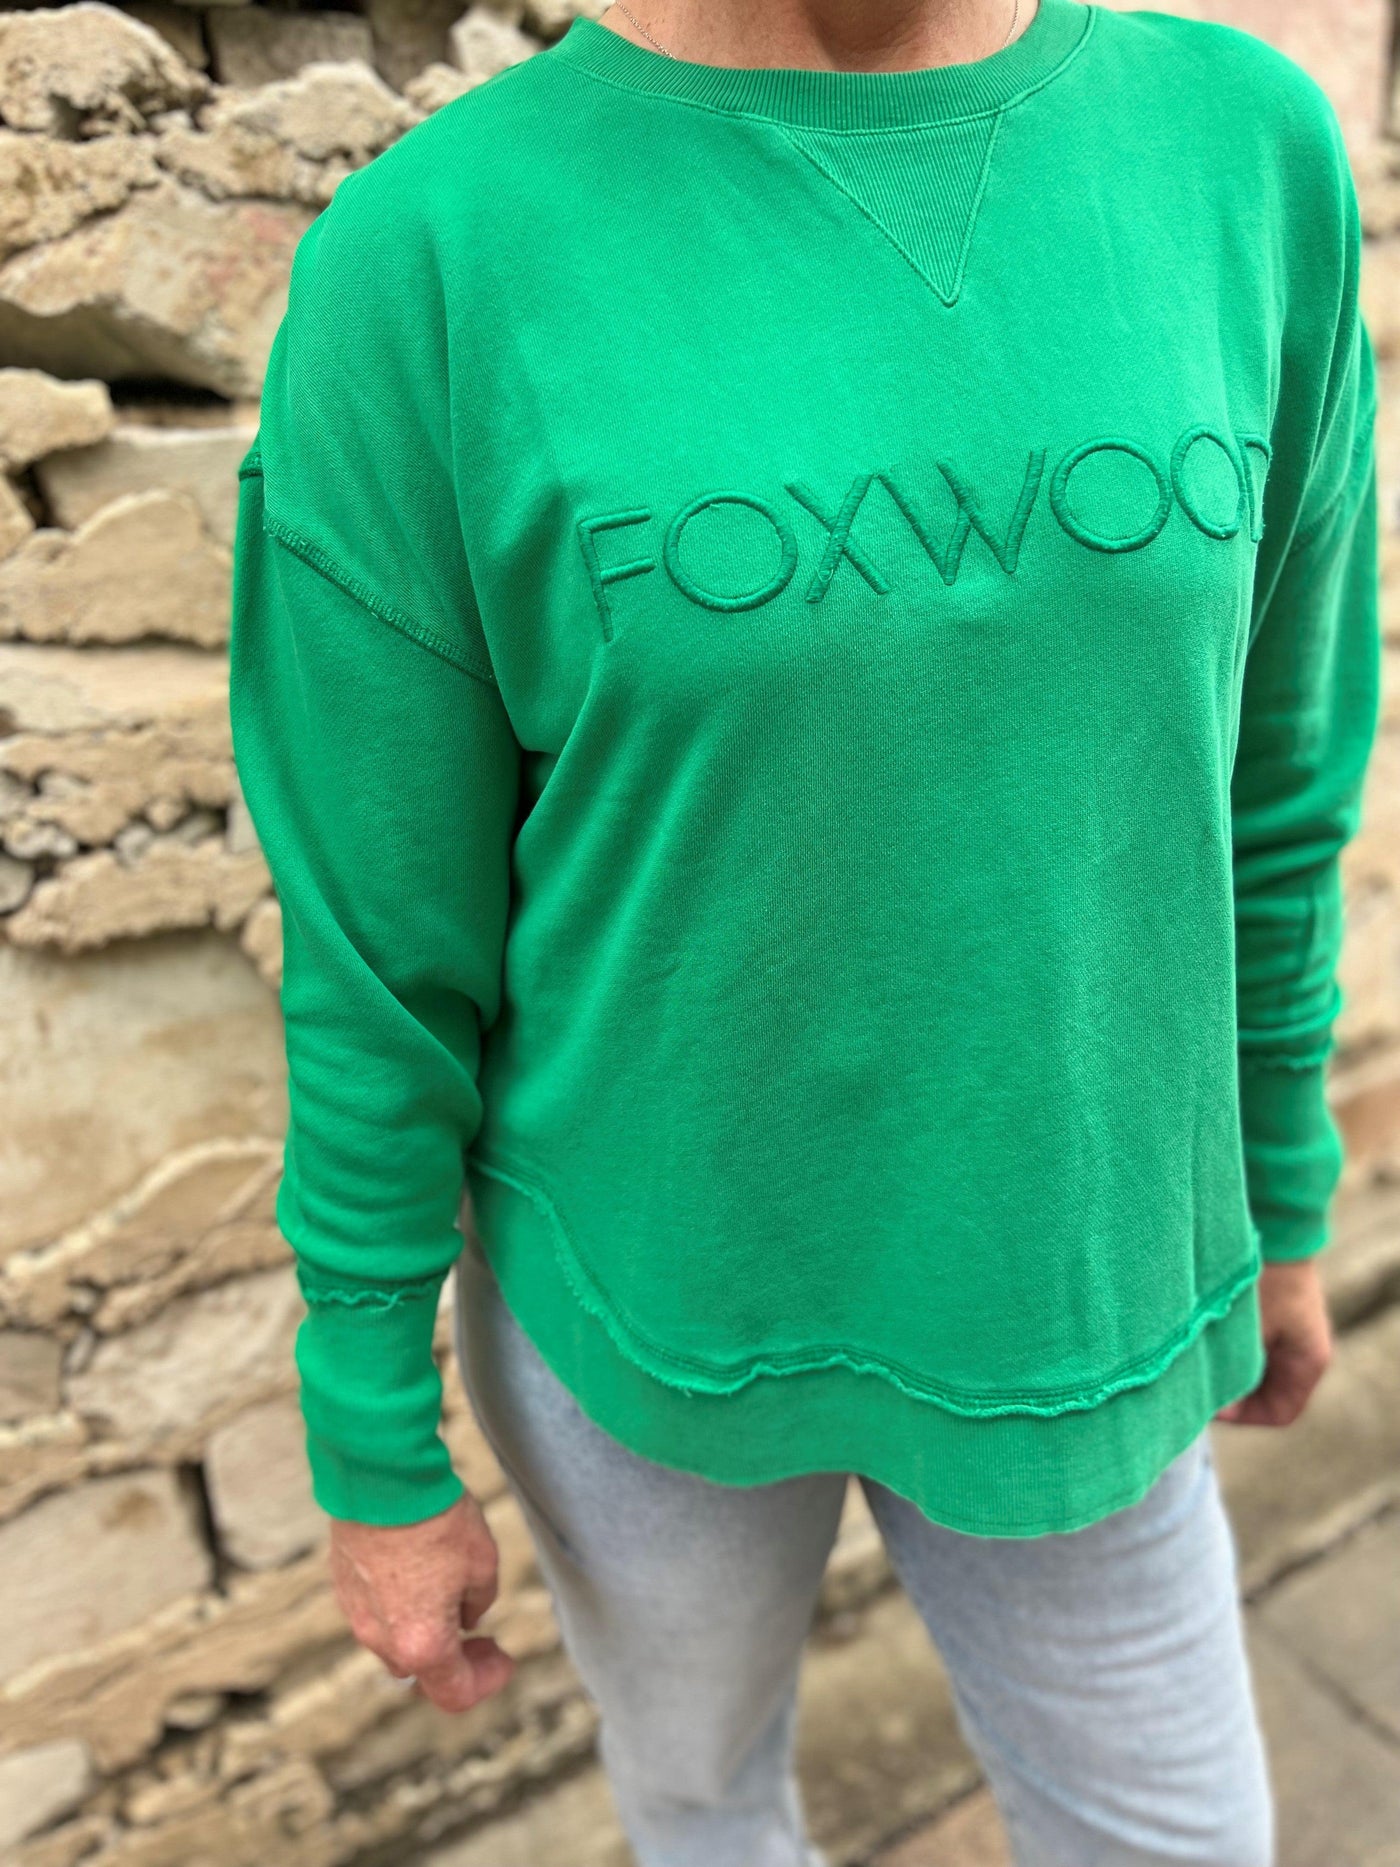 Simplified Crew - Bright Green-Foxwood-Lima & Co